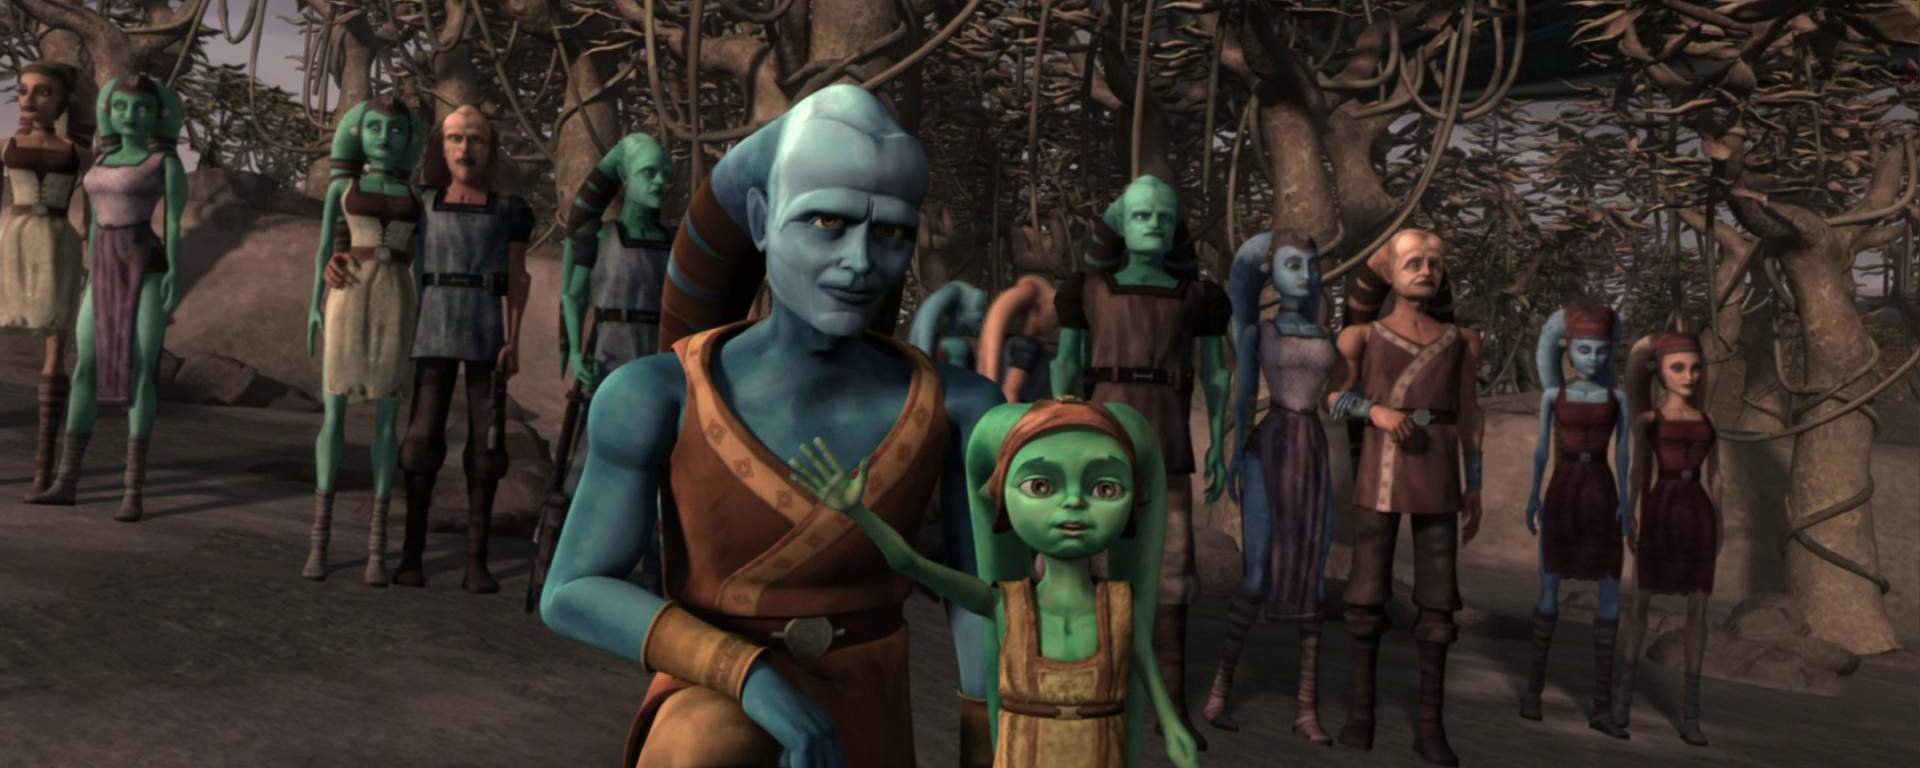 Numa, a Twi'lek child, and several other Twi'leks in an episode of The Clone Wars.